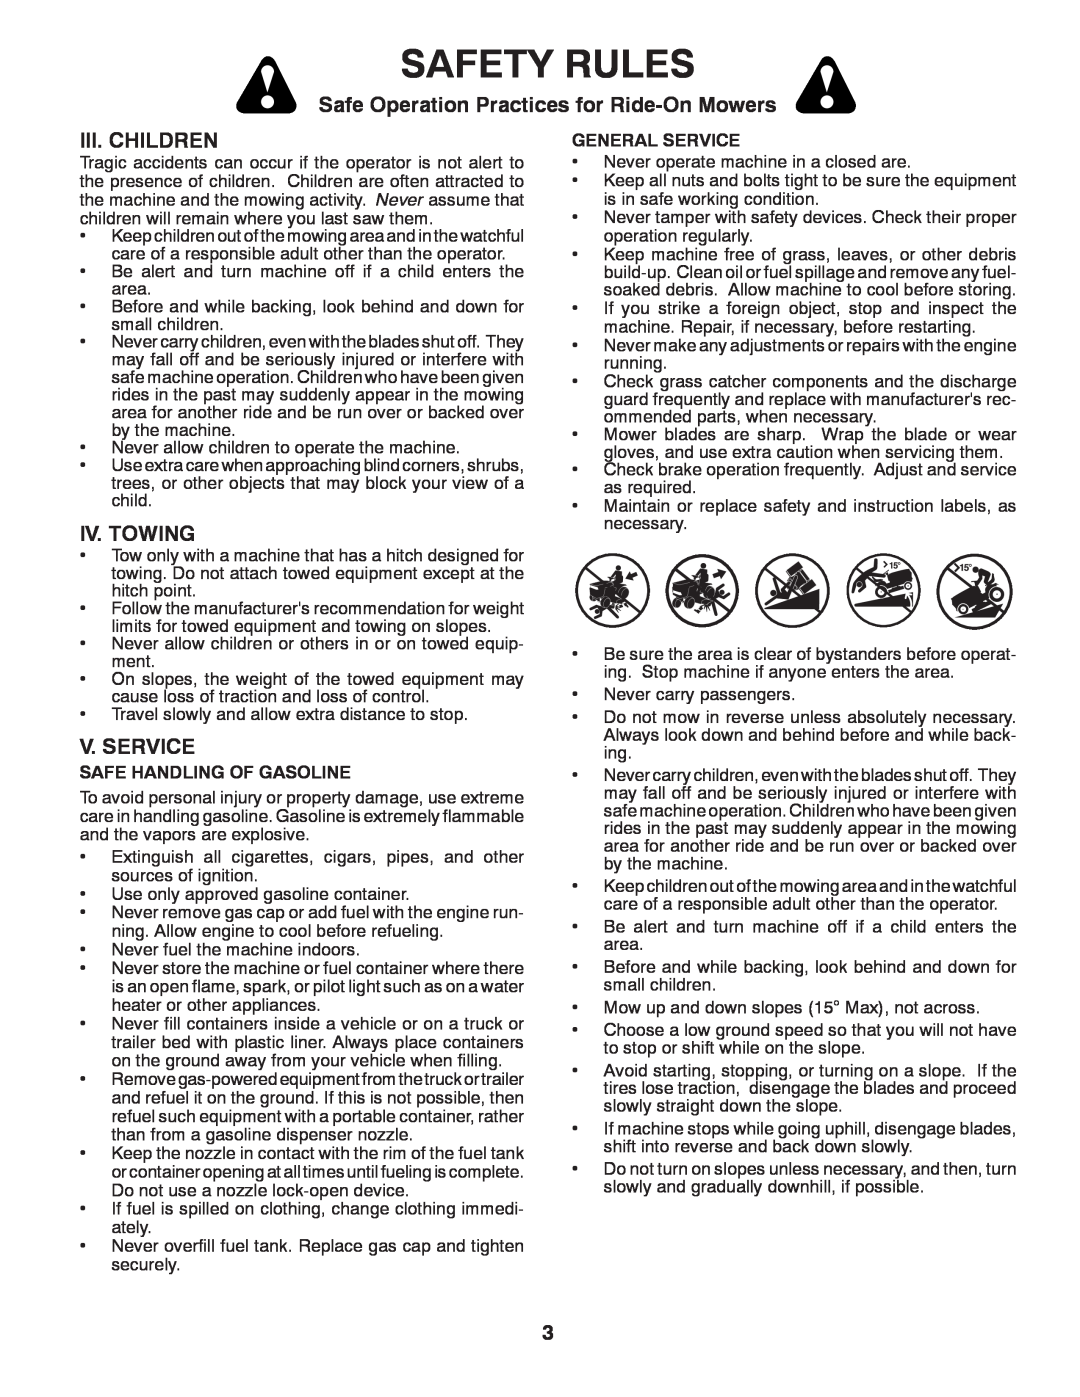 McCulloch 532 40 80-72 Iii. Children, Iv. Towing, V. Service, Safety Rules, Safe Operation Practices for Ride-On Mowers 